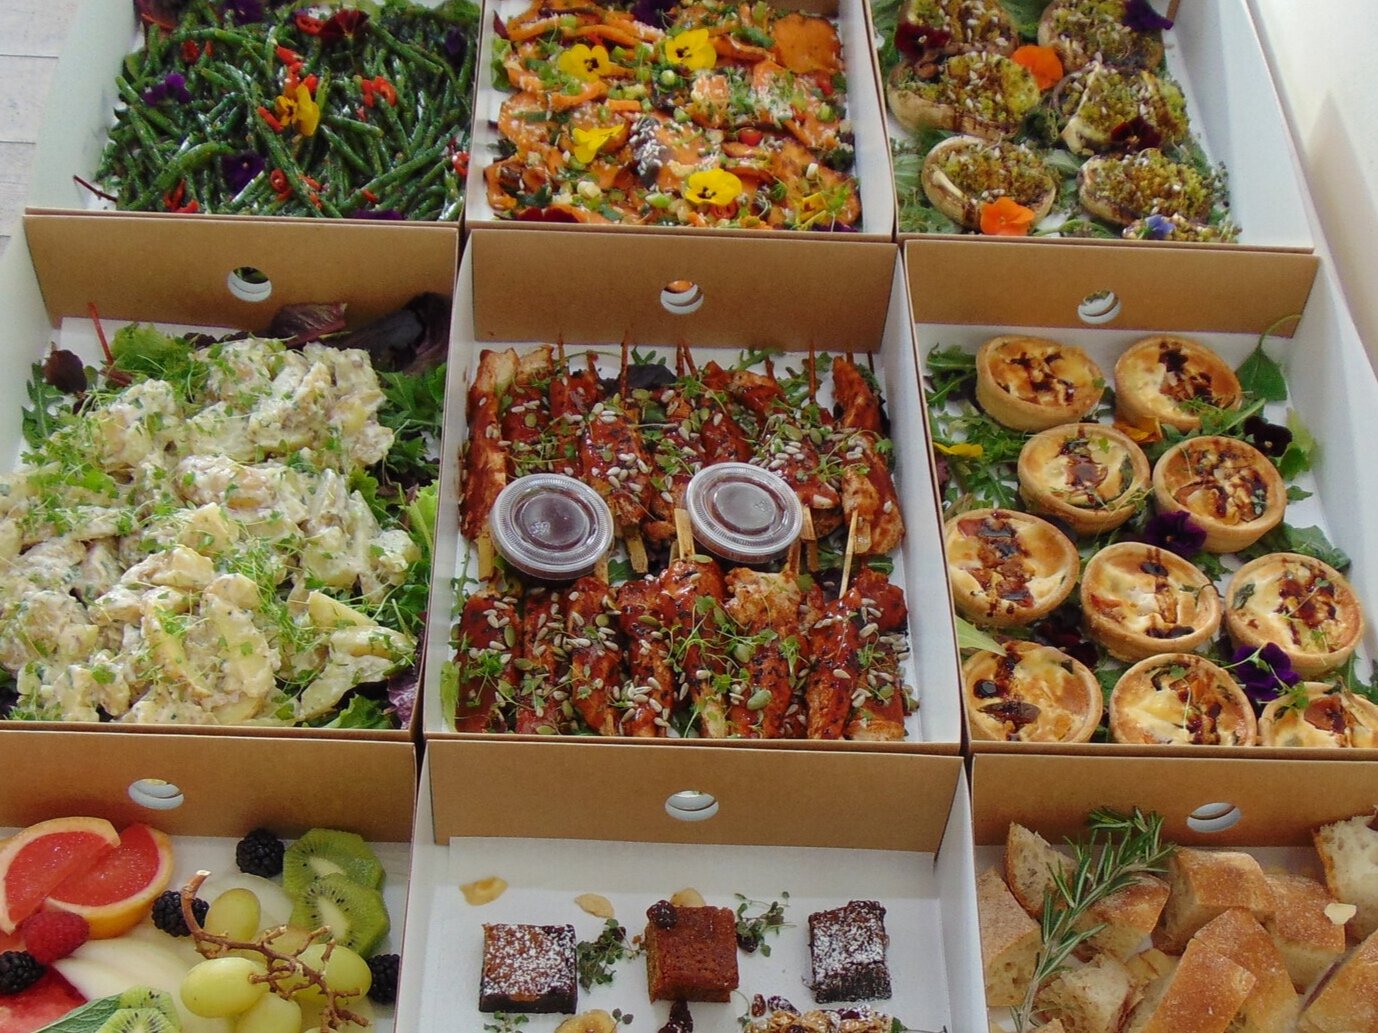 Catering Services across Leeds